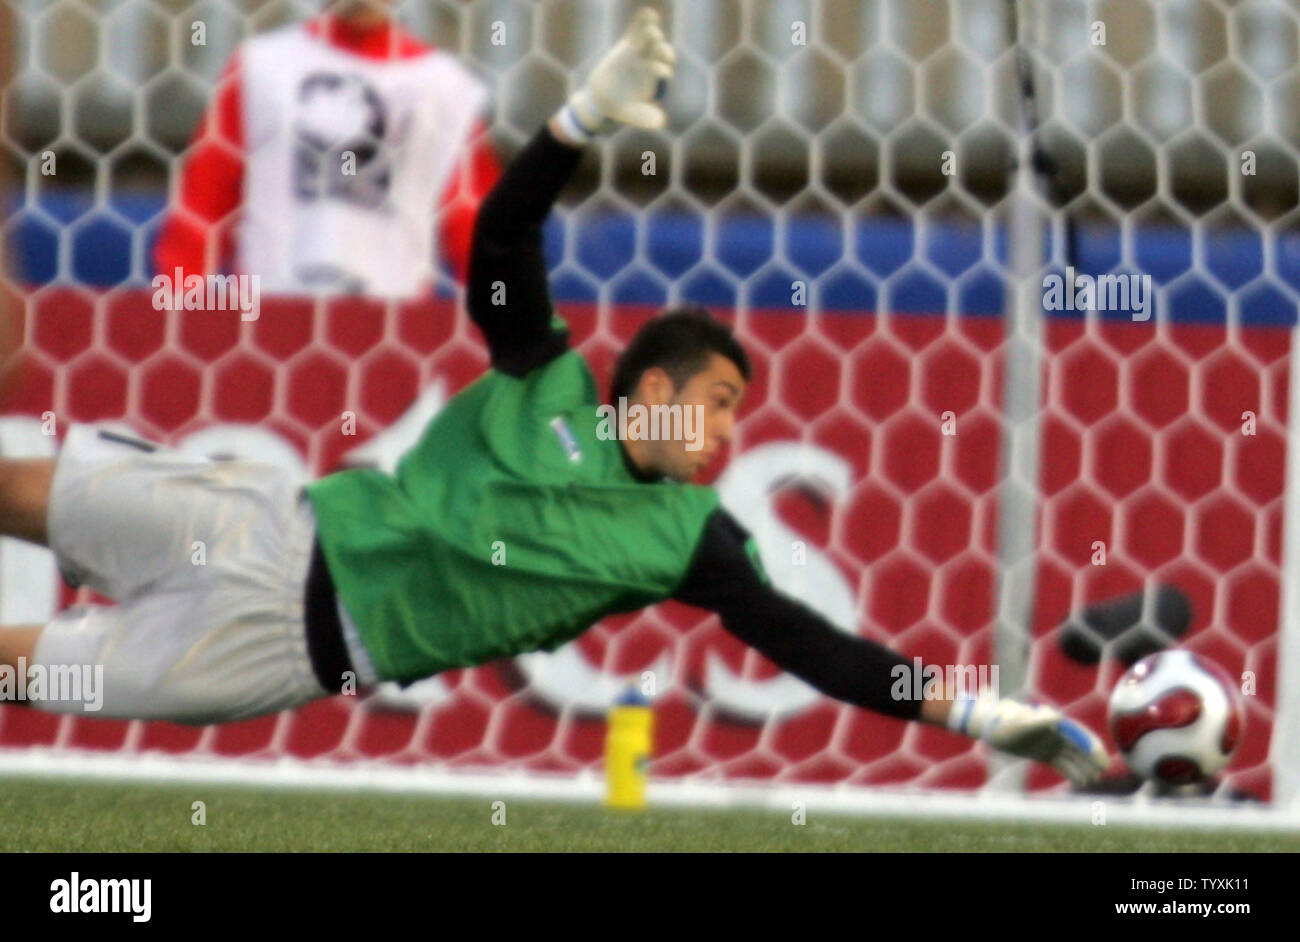 Czech Republic's goalkeeper Radek Petr deflects a shot from Argentina's Sergio Aguero during the second half of the FIFA Under-20 World Cup match at Frank Clair Stadium in Ottawa, Canada on June 30, 2007. The match ended in a scoreless tie. (UPI Photo/Grace Chiu). Stock Photo